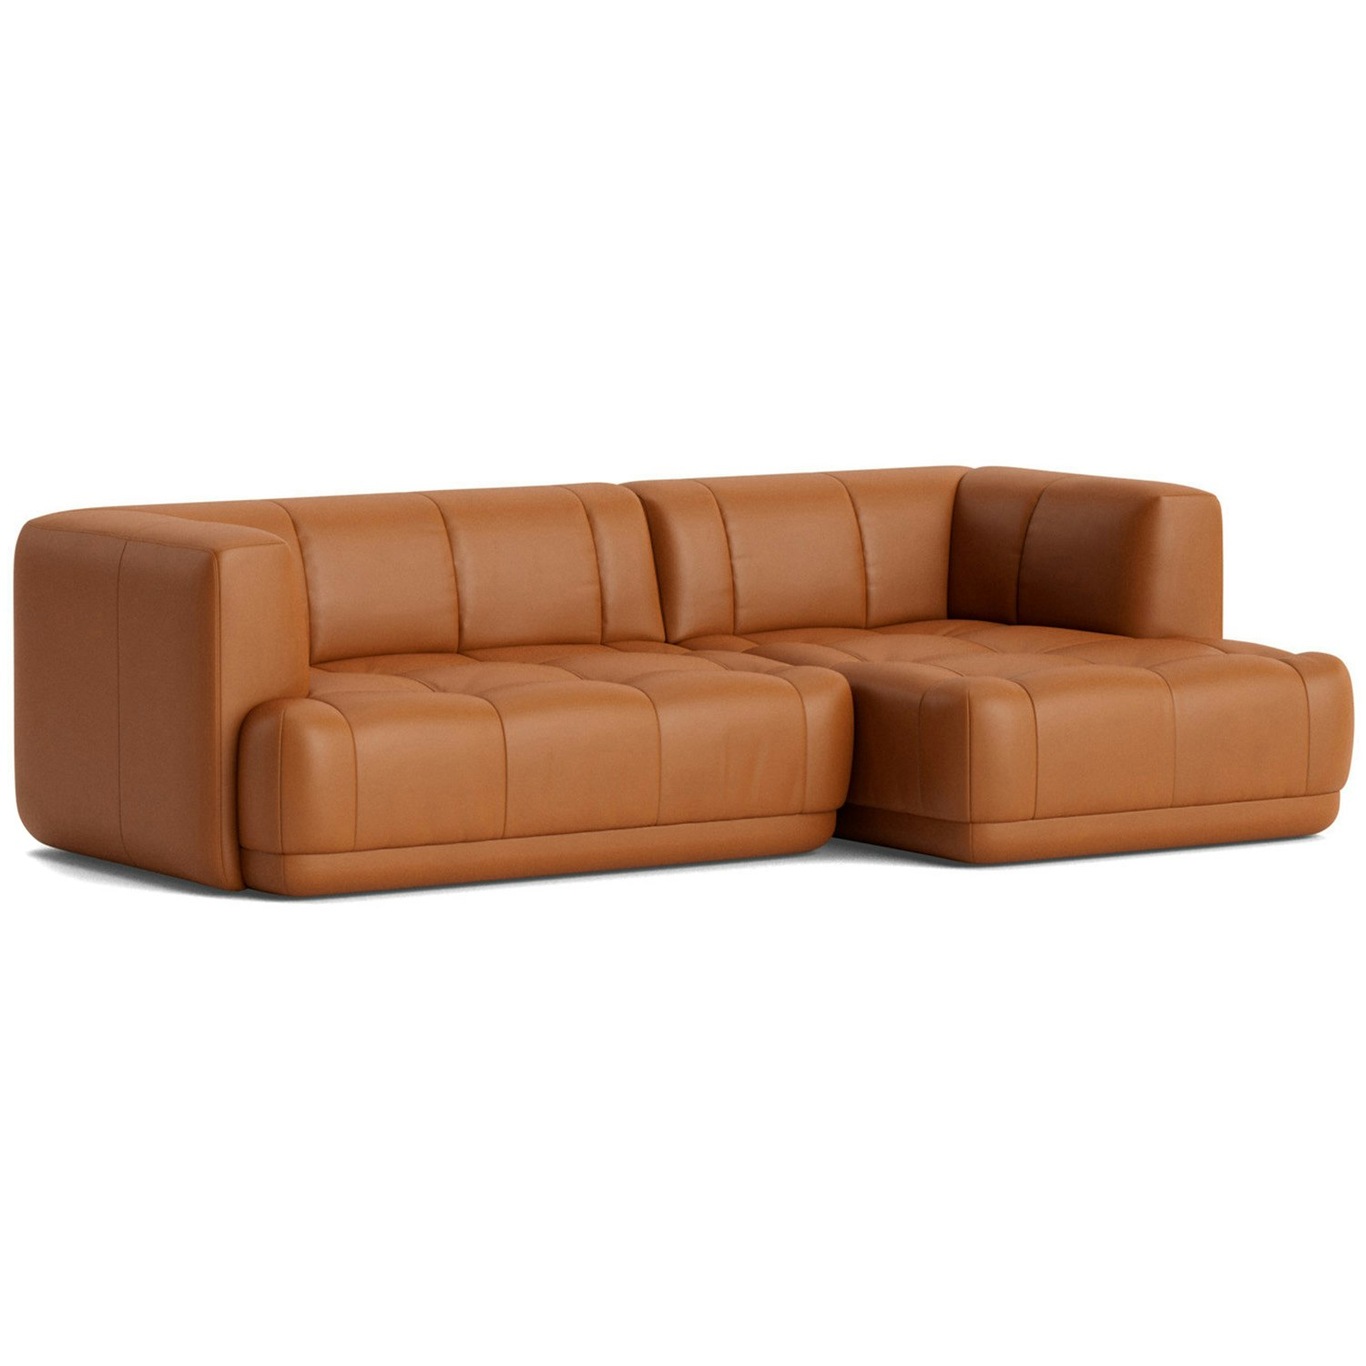 Quilton 3-Seater Sofa Configuration 19 Right, Leather Nevada NV2488